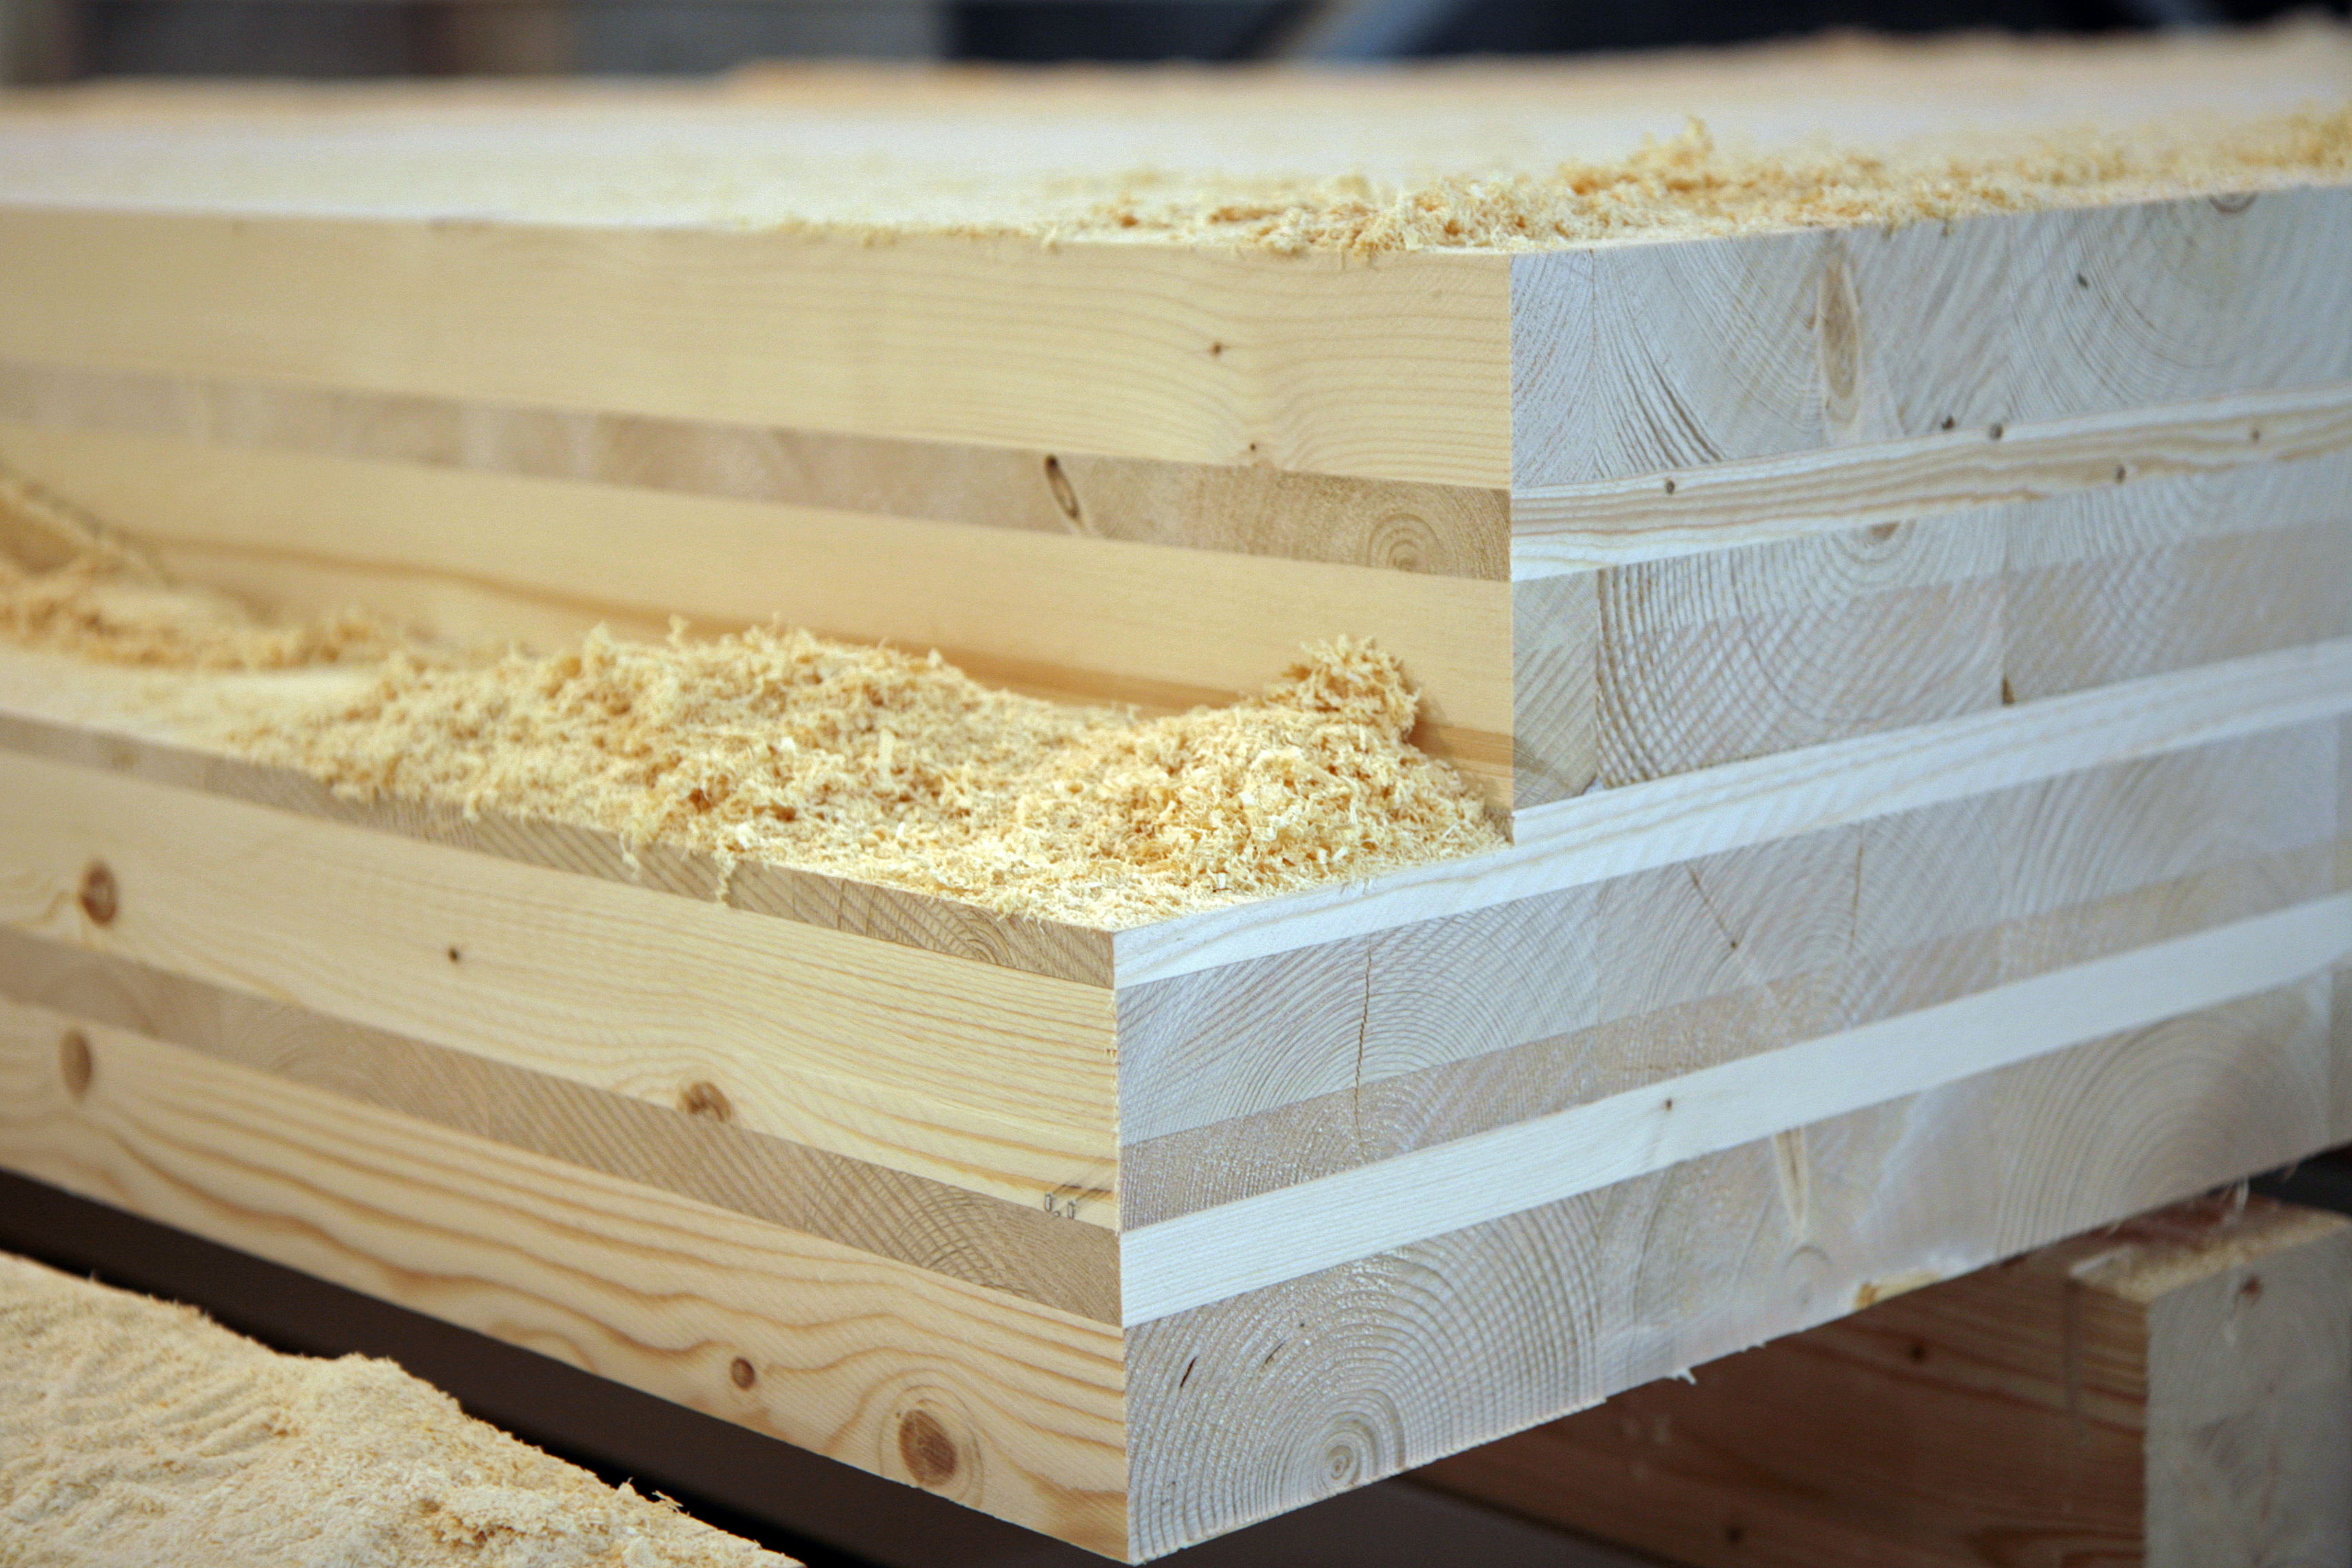 The people in Kuhmo have something unique to offer to the rest of the world: the close-grained Kainuu timber is sometimes even said to be the best in the world for sawmilling. The photo shows cross-laminated timber (CLT). Photo: Anna Kauppi